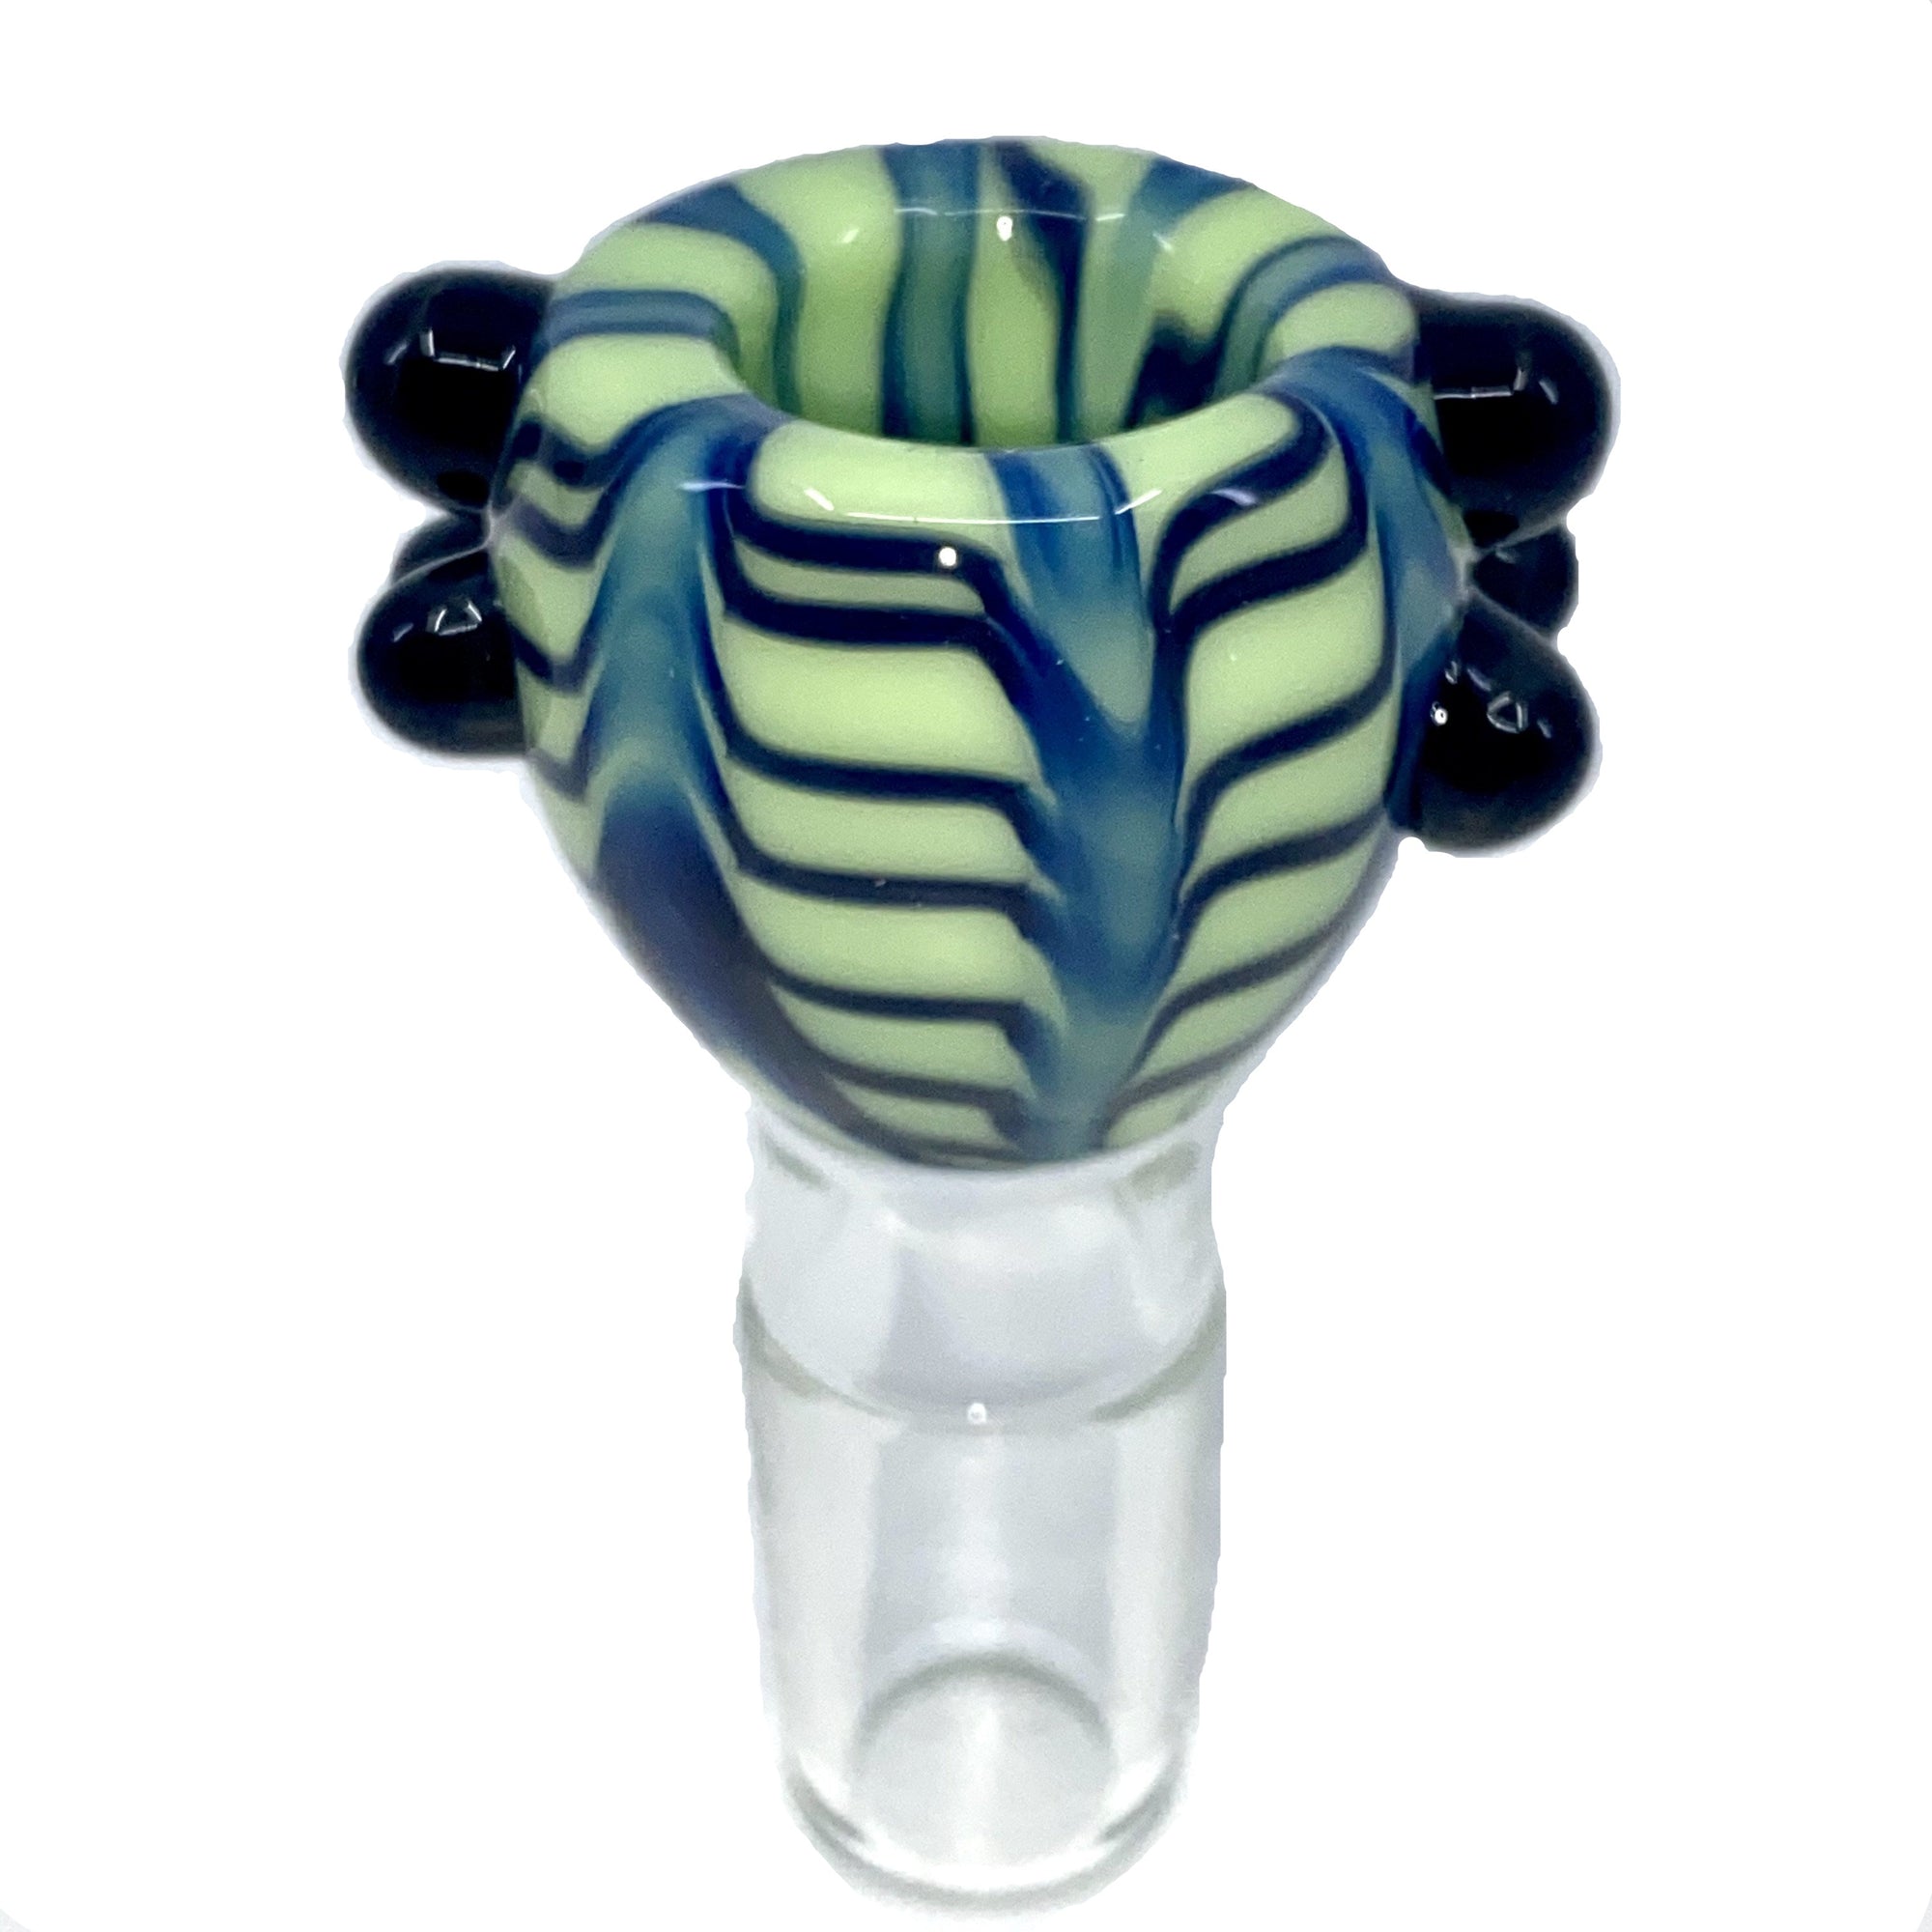 Colored Wrap and Rake Push Bowl Slide 18mm (Green/Blue) show variants